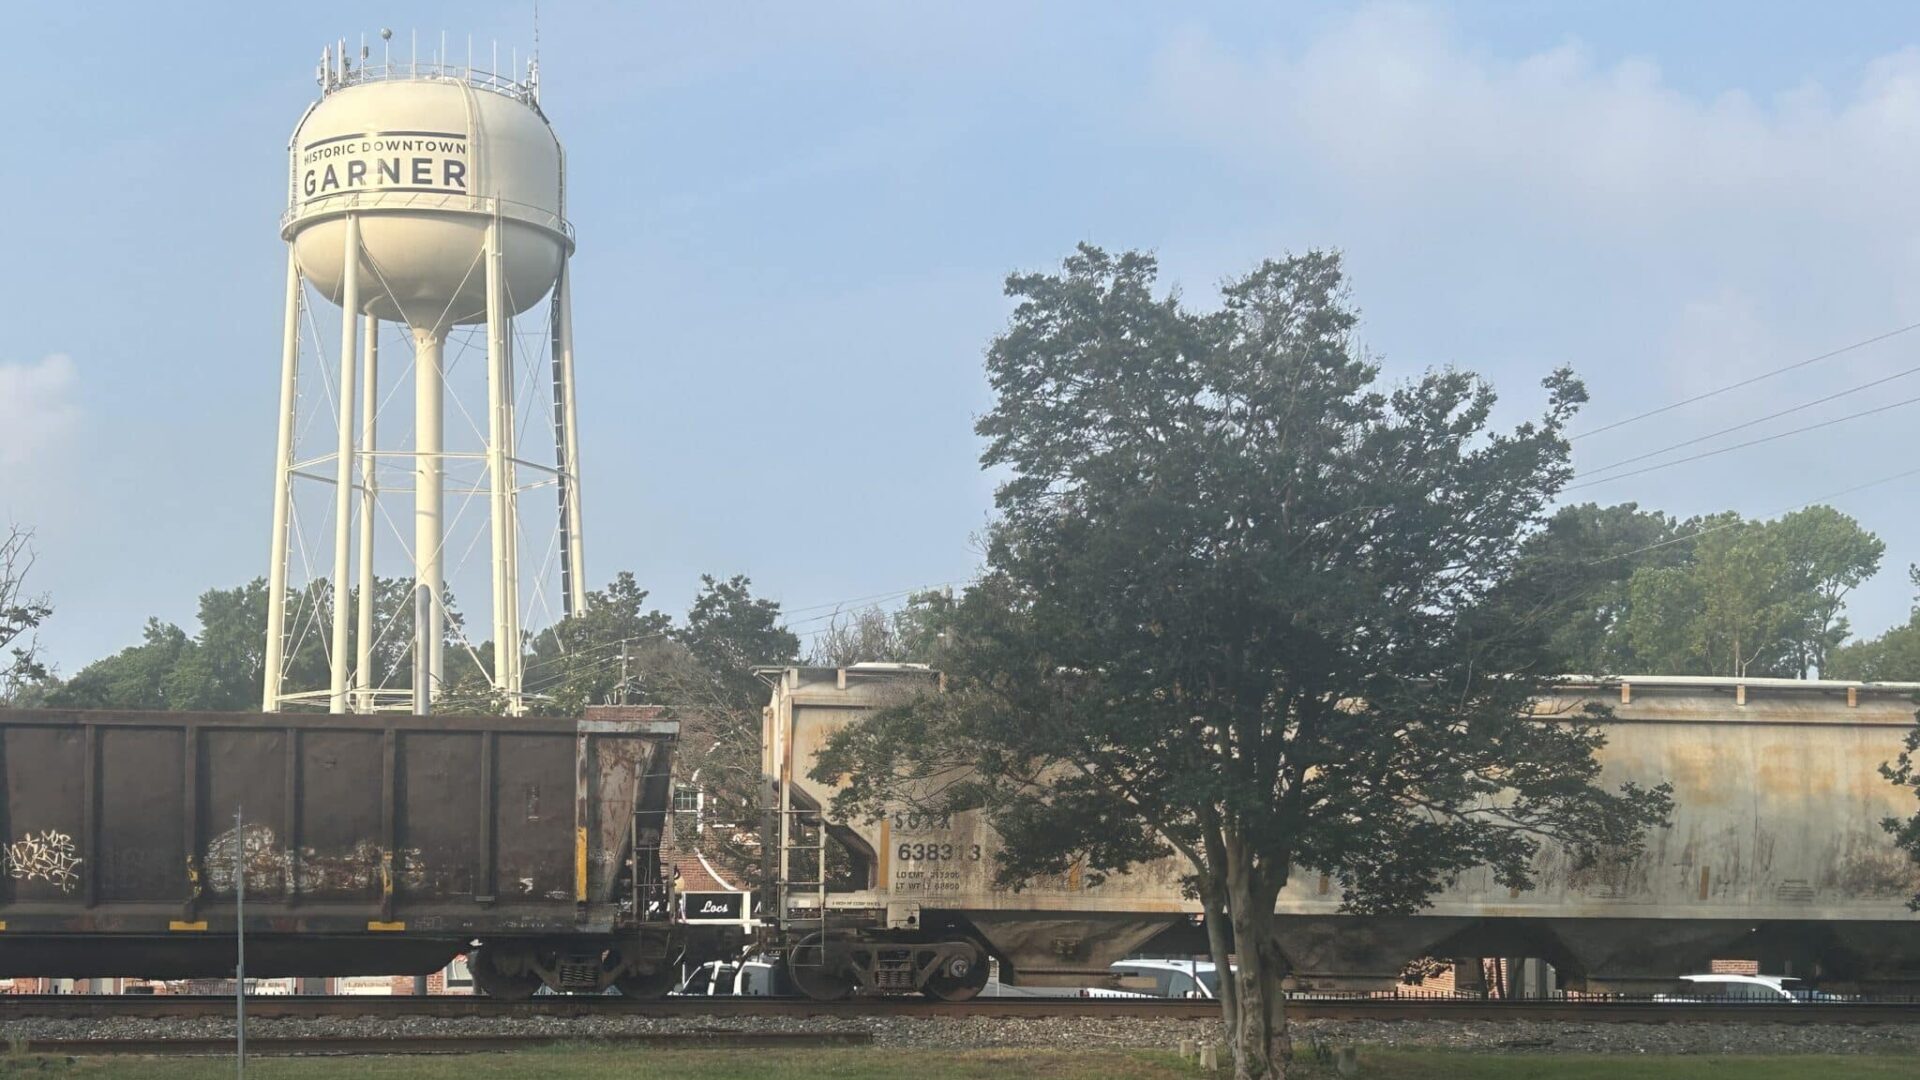 Water tower with brown and cream trainncars on the railroad track and one tree.